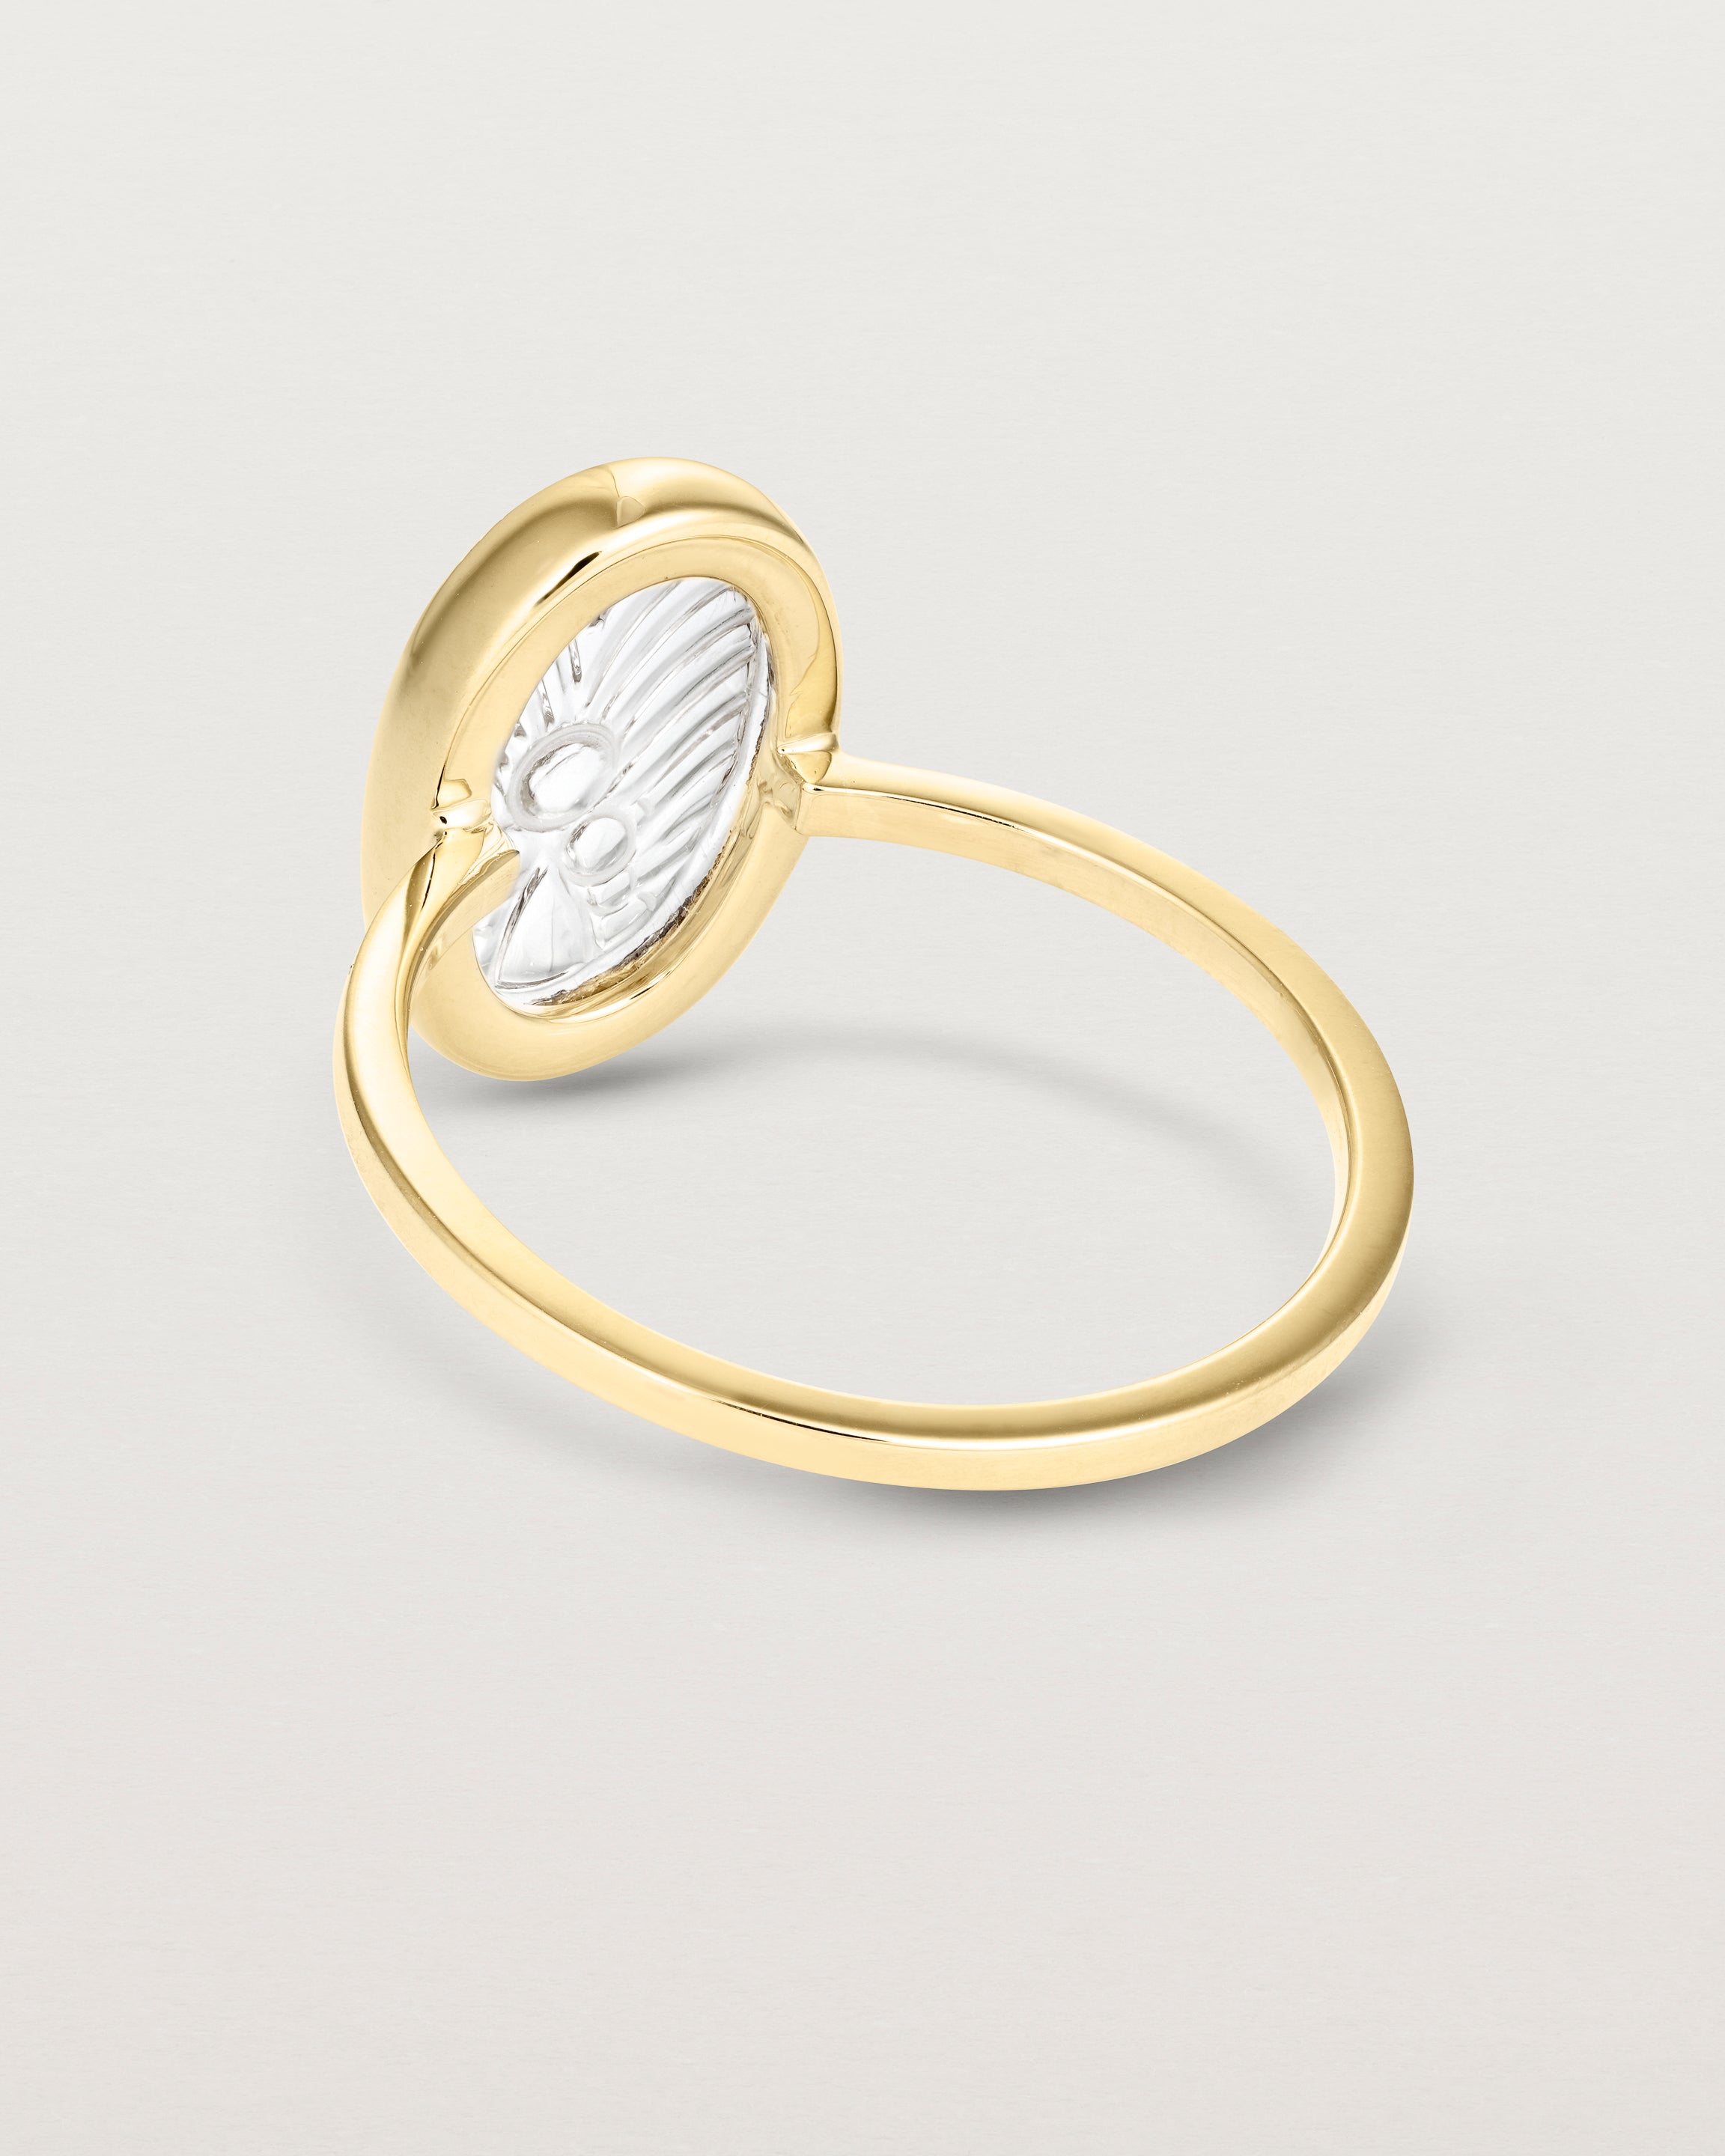 Back view of the Ruan Ring | Carved Quartz in yellow gold.